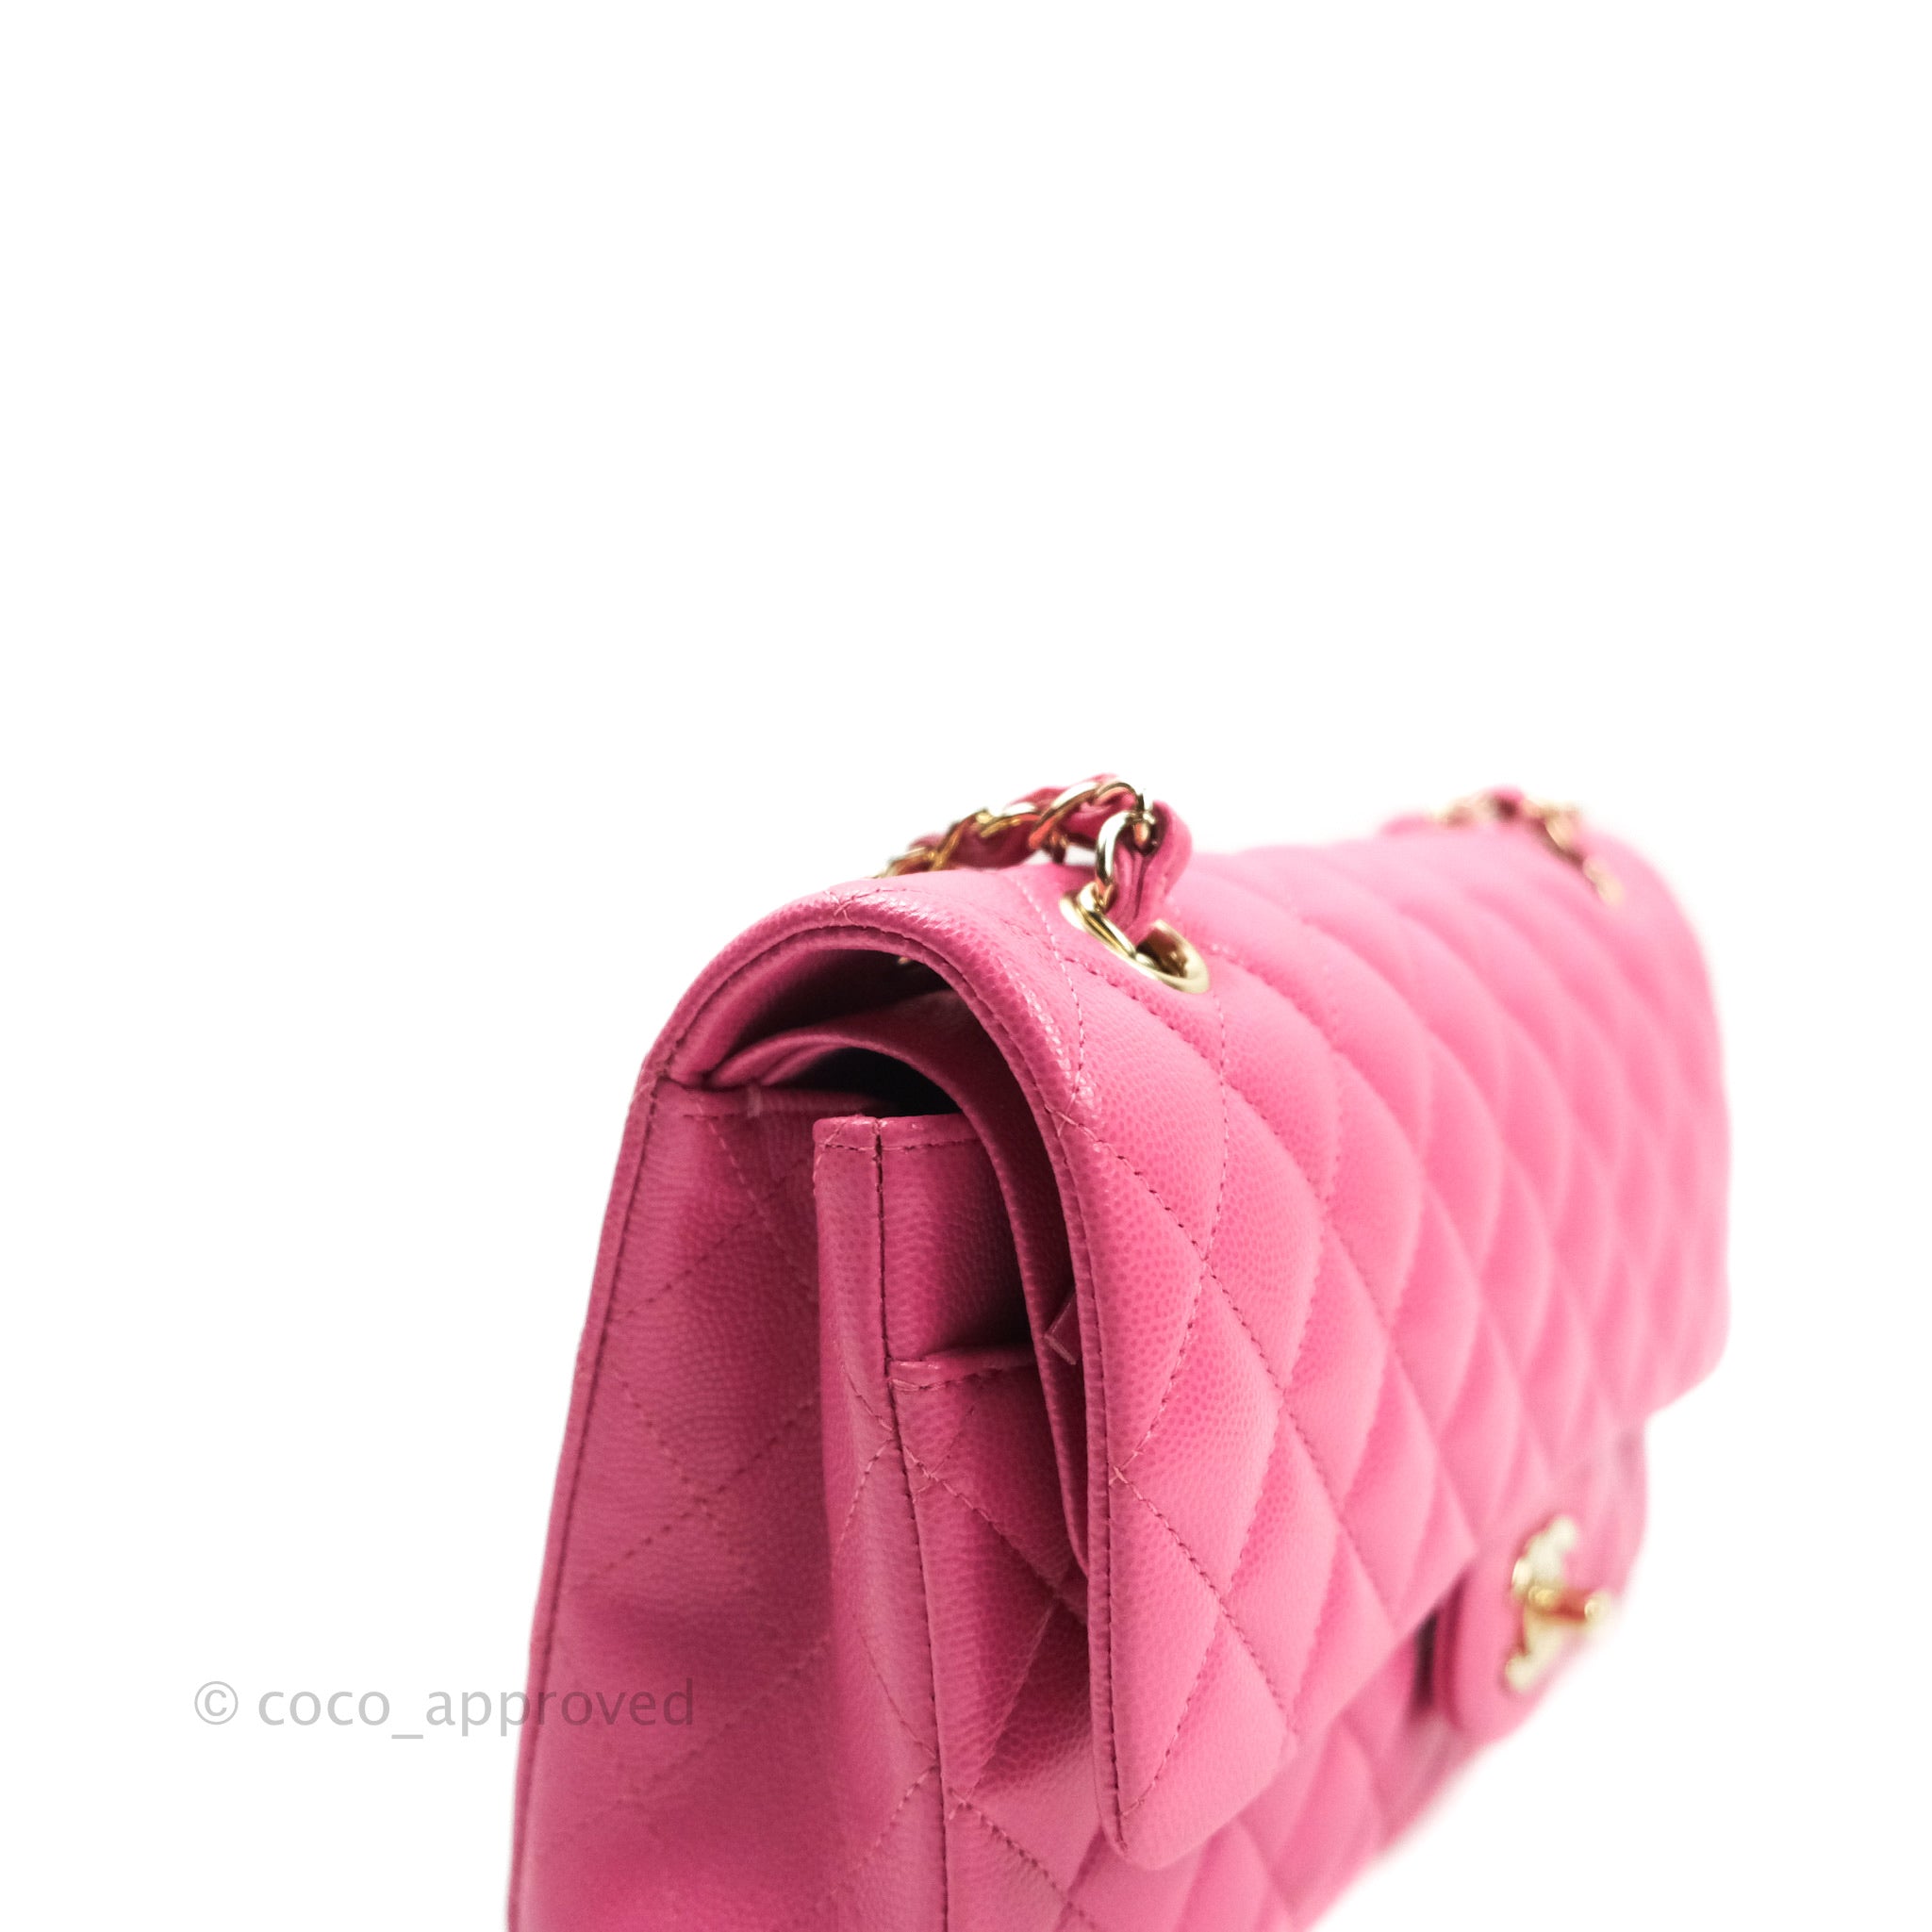 Chanel Classic bag MM in fuchsia pink leather SHW - DOWNTOWN